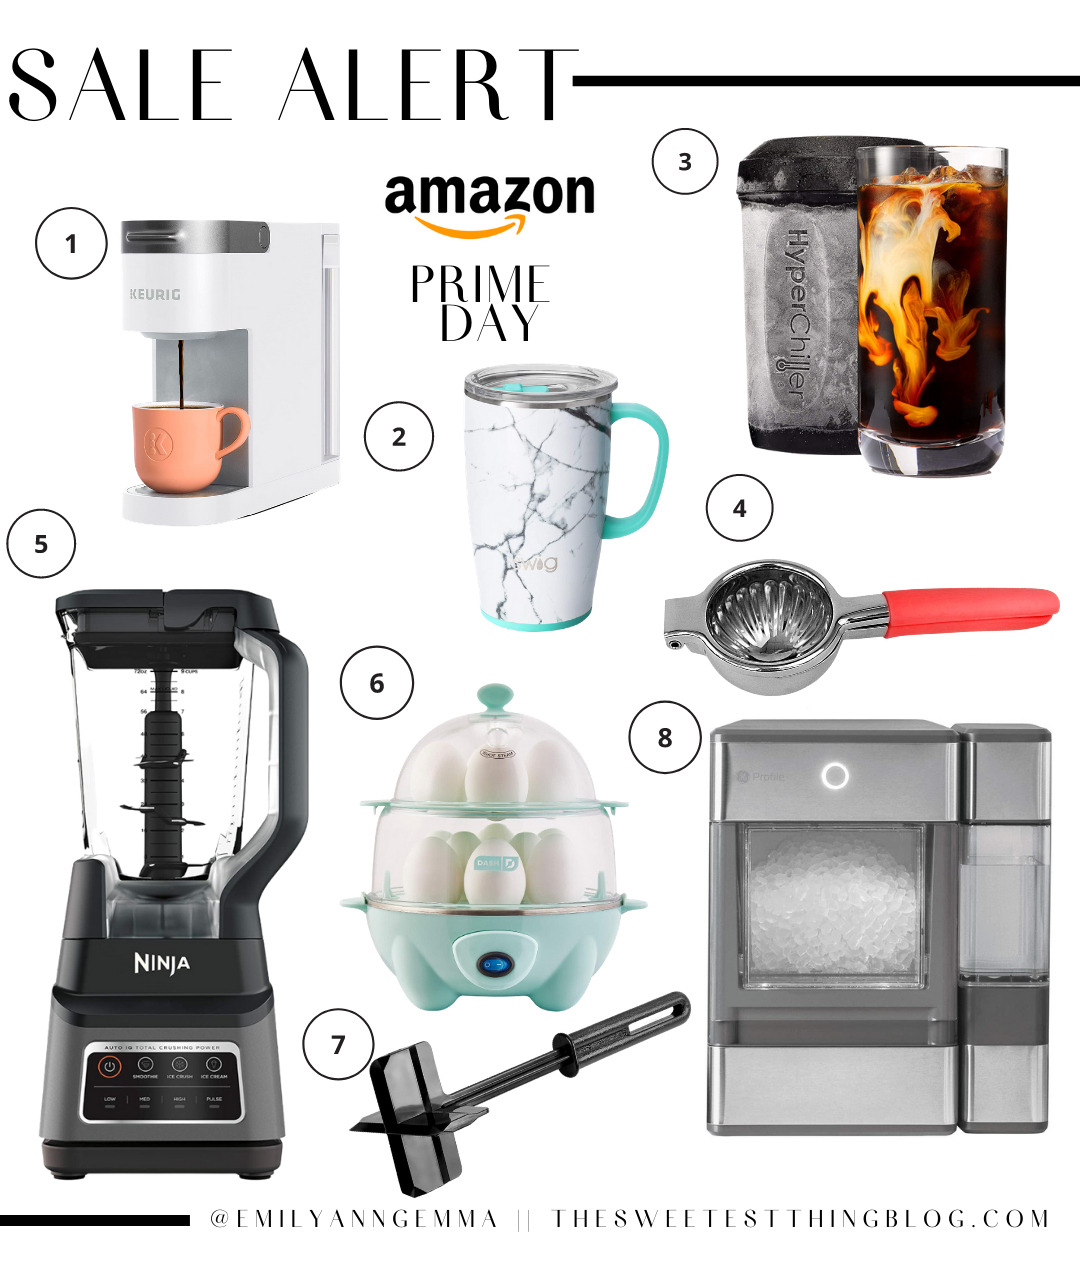 Amazon Prime Day by popular US life and Style blog, The Sweetest Thing: collage image of a lemon squeezer, Hyper Chiller, Keurig coffee maker, Ninja blender, pebble ice machine, rapid egg cooker, insulated thermos, and meat chopper. 